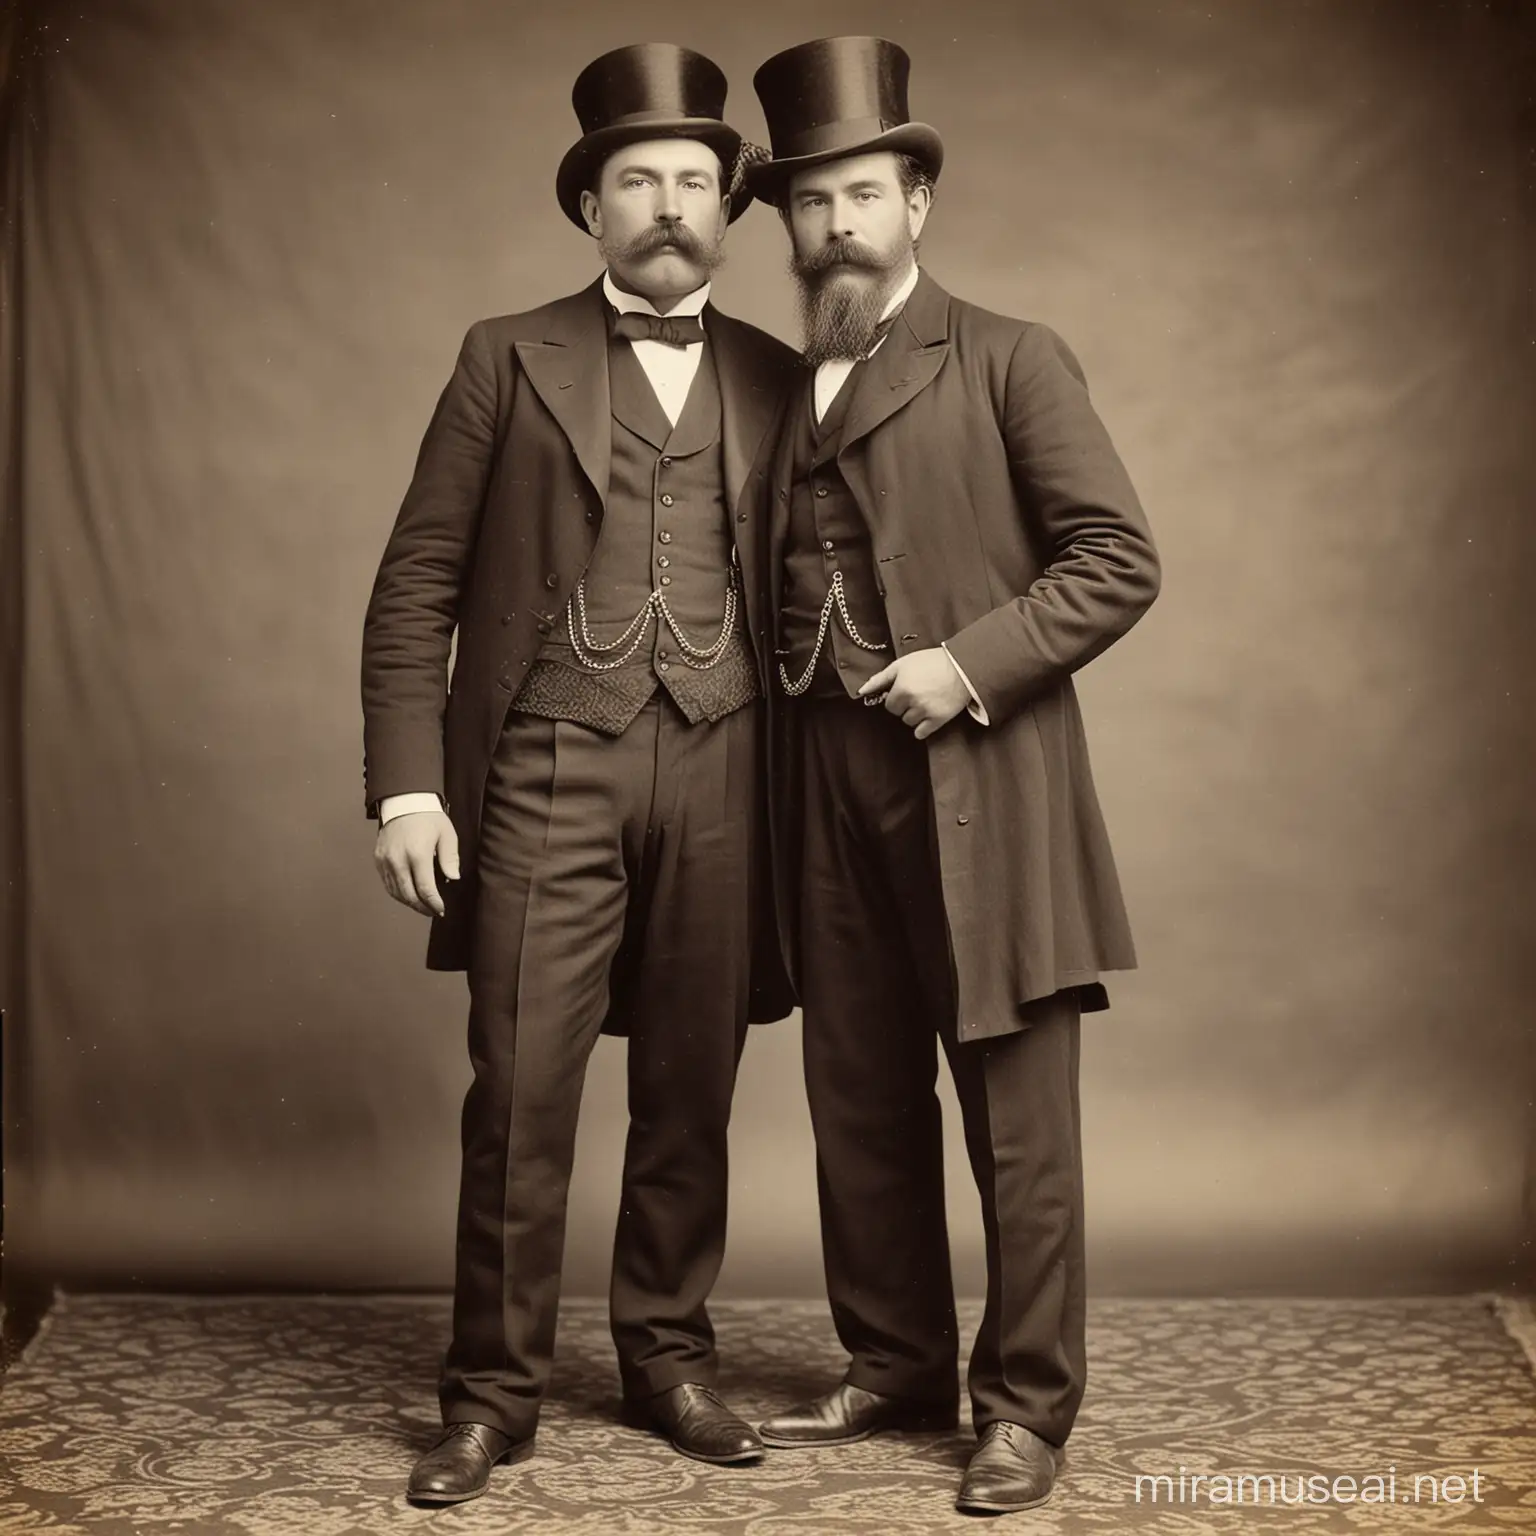 19th century monochrome photo taken in photo studio, full length view of a man with moustache holding the waist of a bearded man, wearing a suit and a top hat, loving